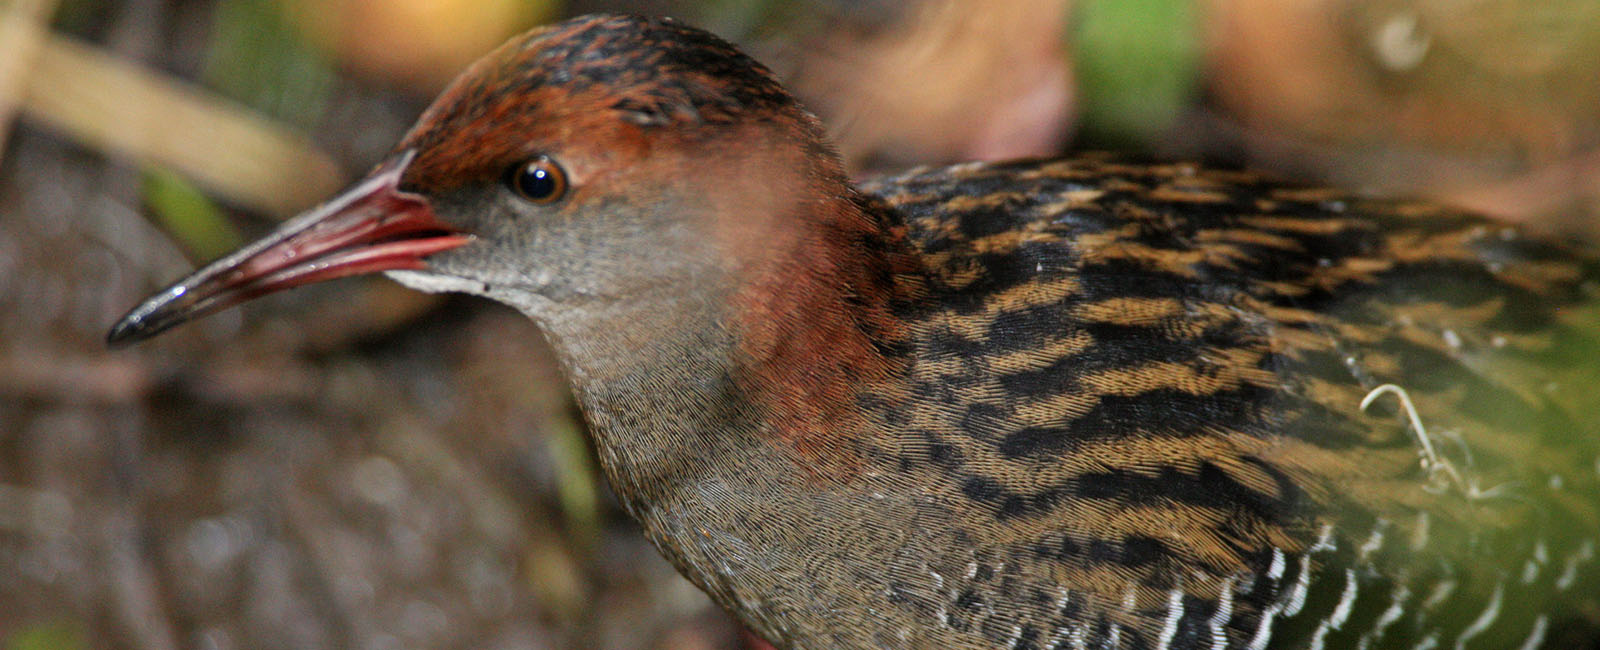 A brown-breasted bird with black and orange back patterns and a red beak.  